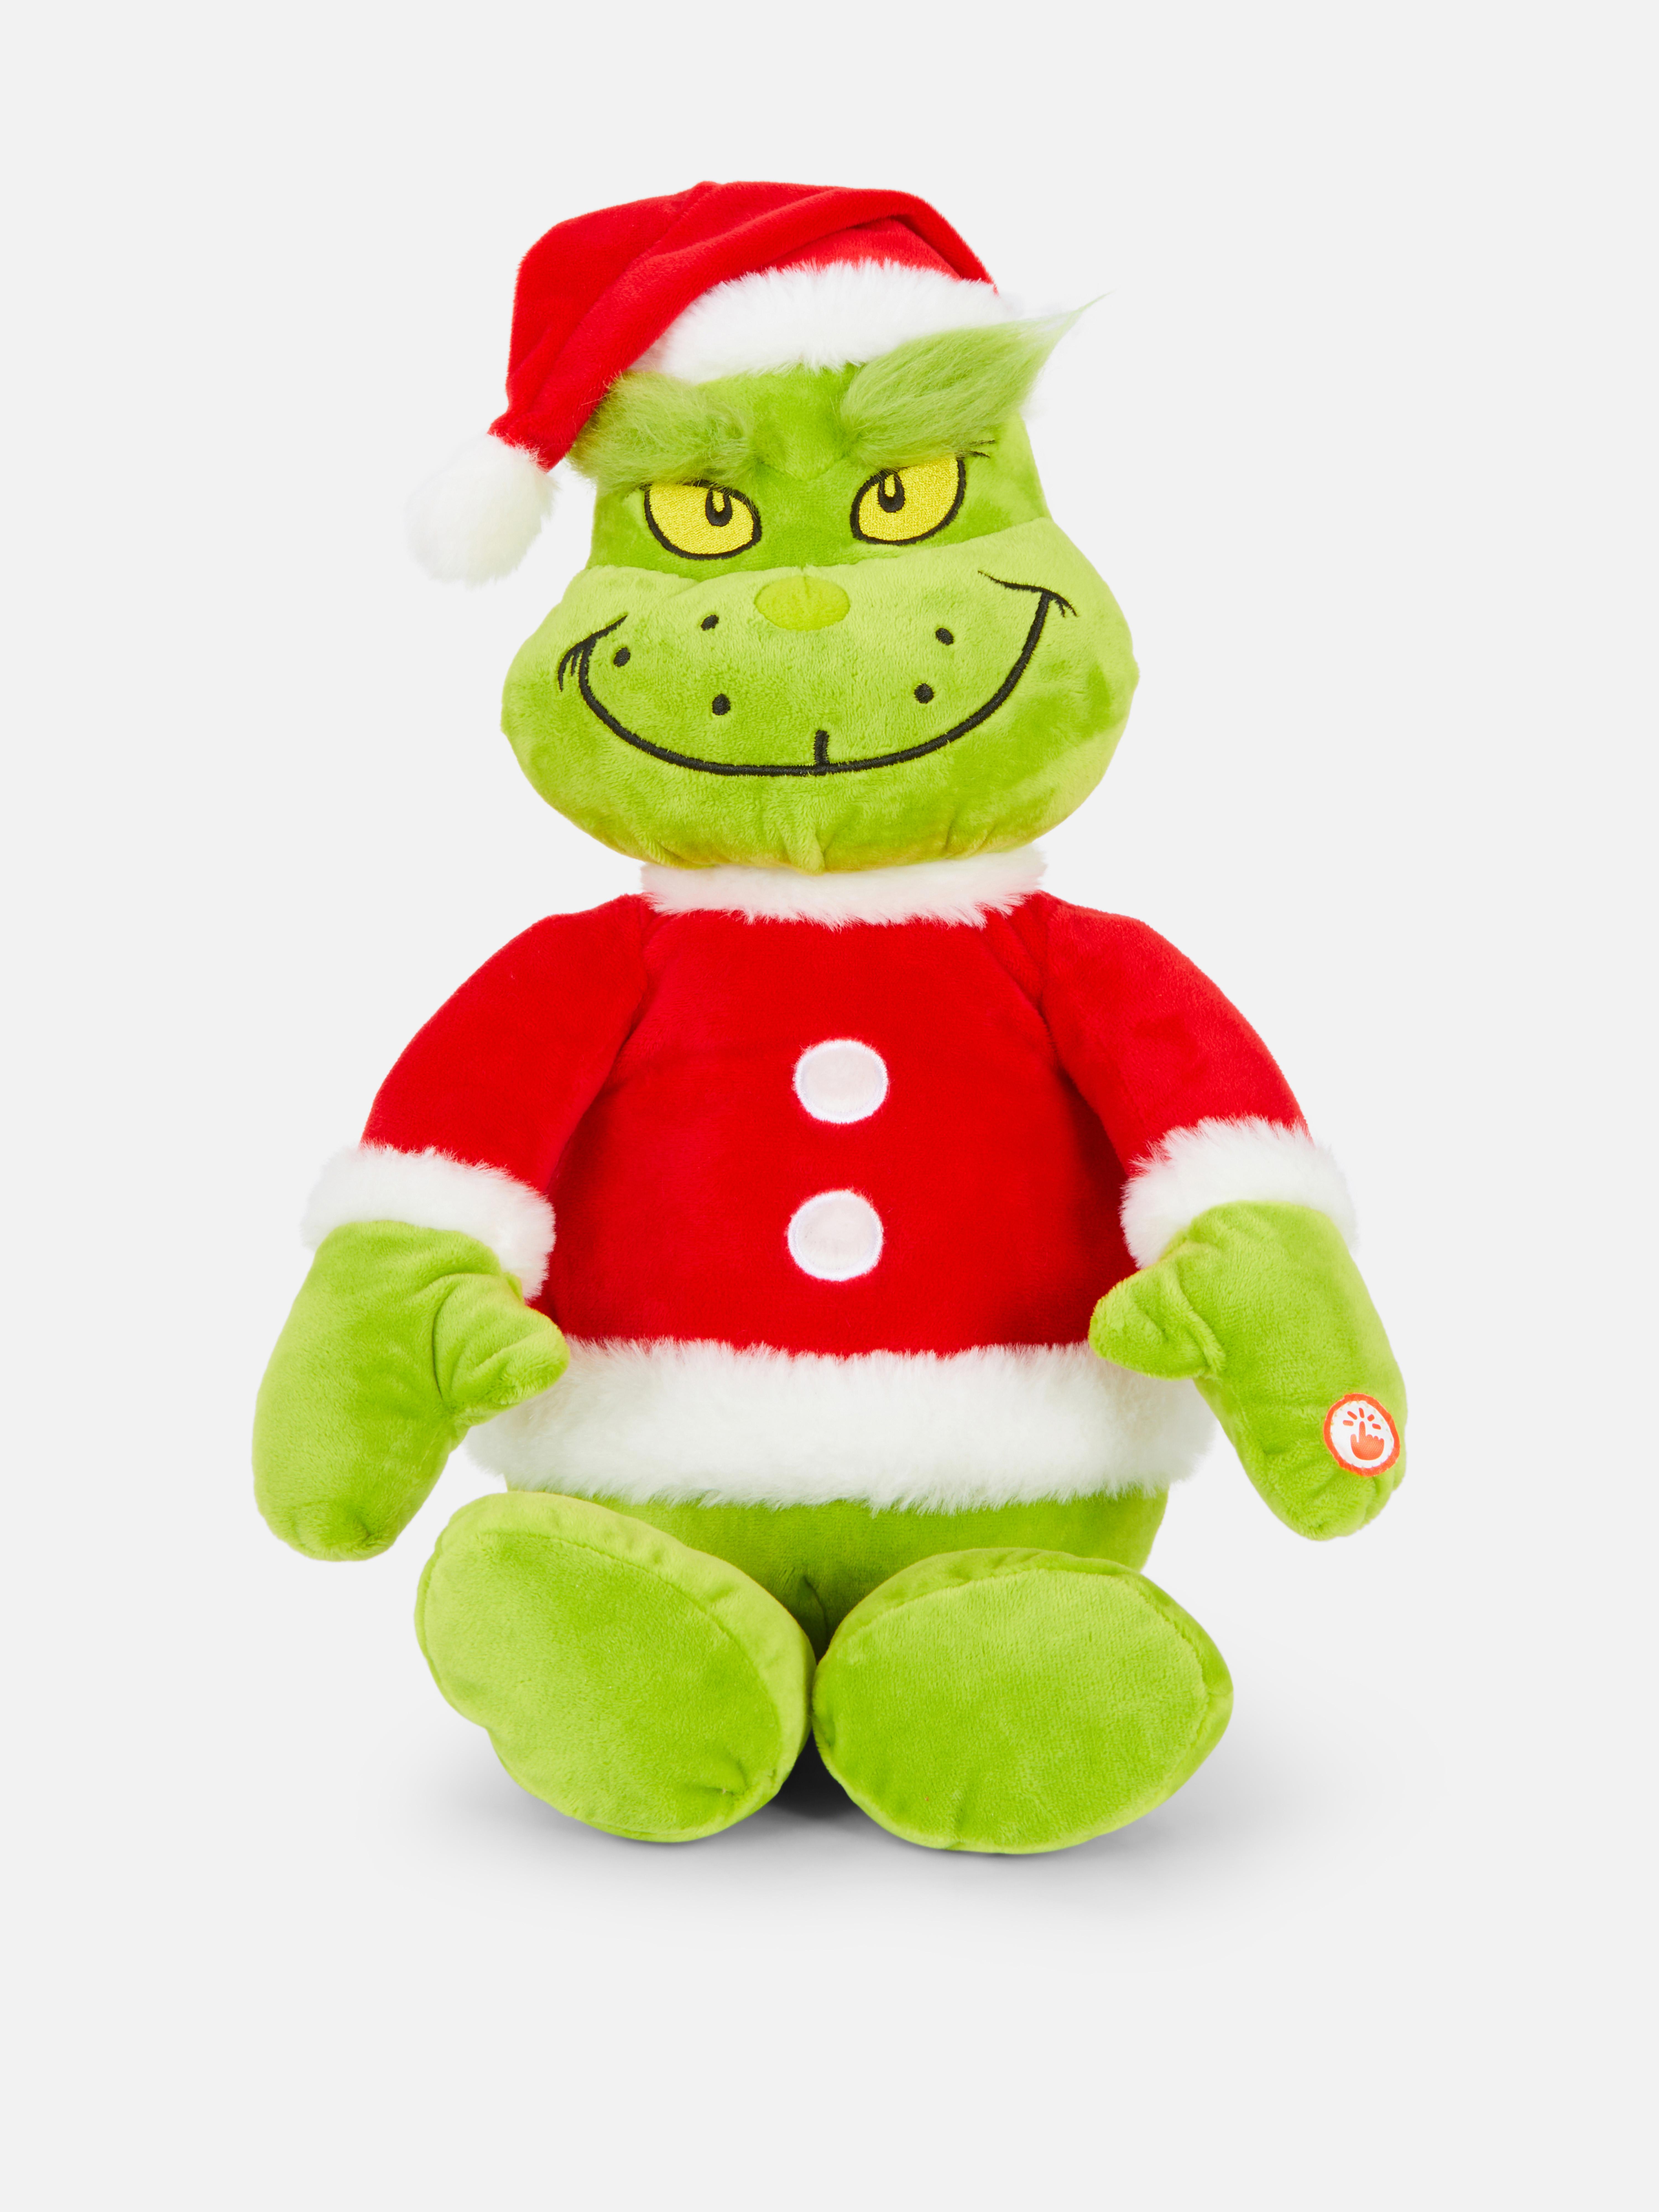 The Grinch Plush Toy